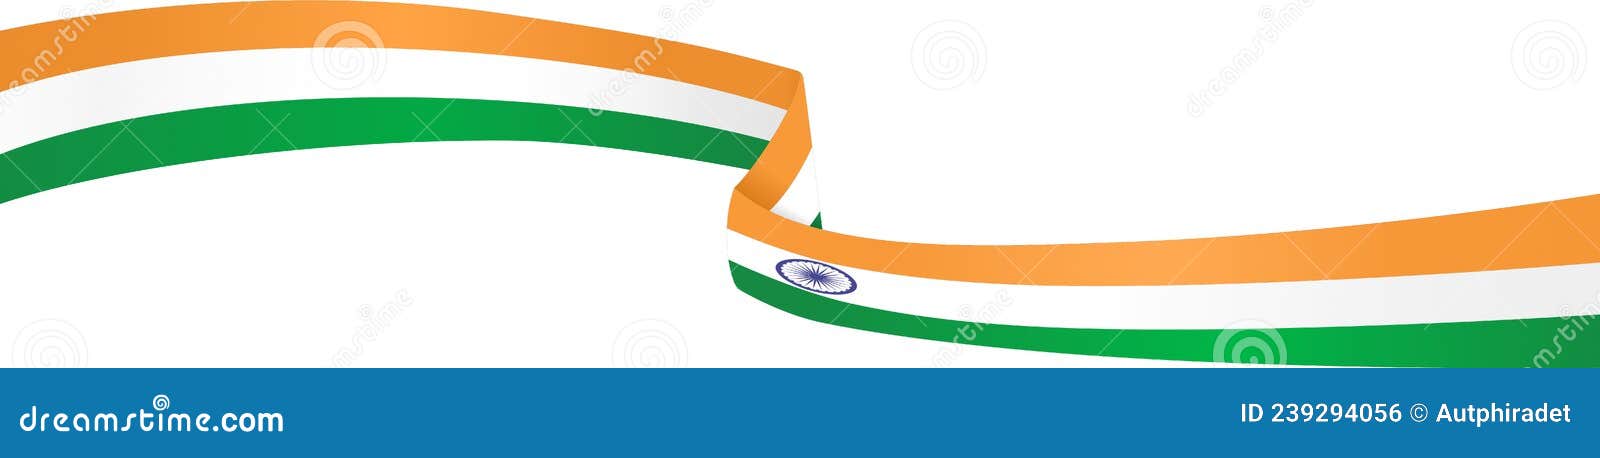 Long Waving India Flag Isolated on Png or Transparent Background,Symbol  India,template for Banner,card,advertising ,promote,and Stock Vector -  Illustration of card, isolated: 239294056